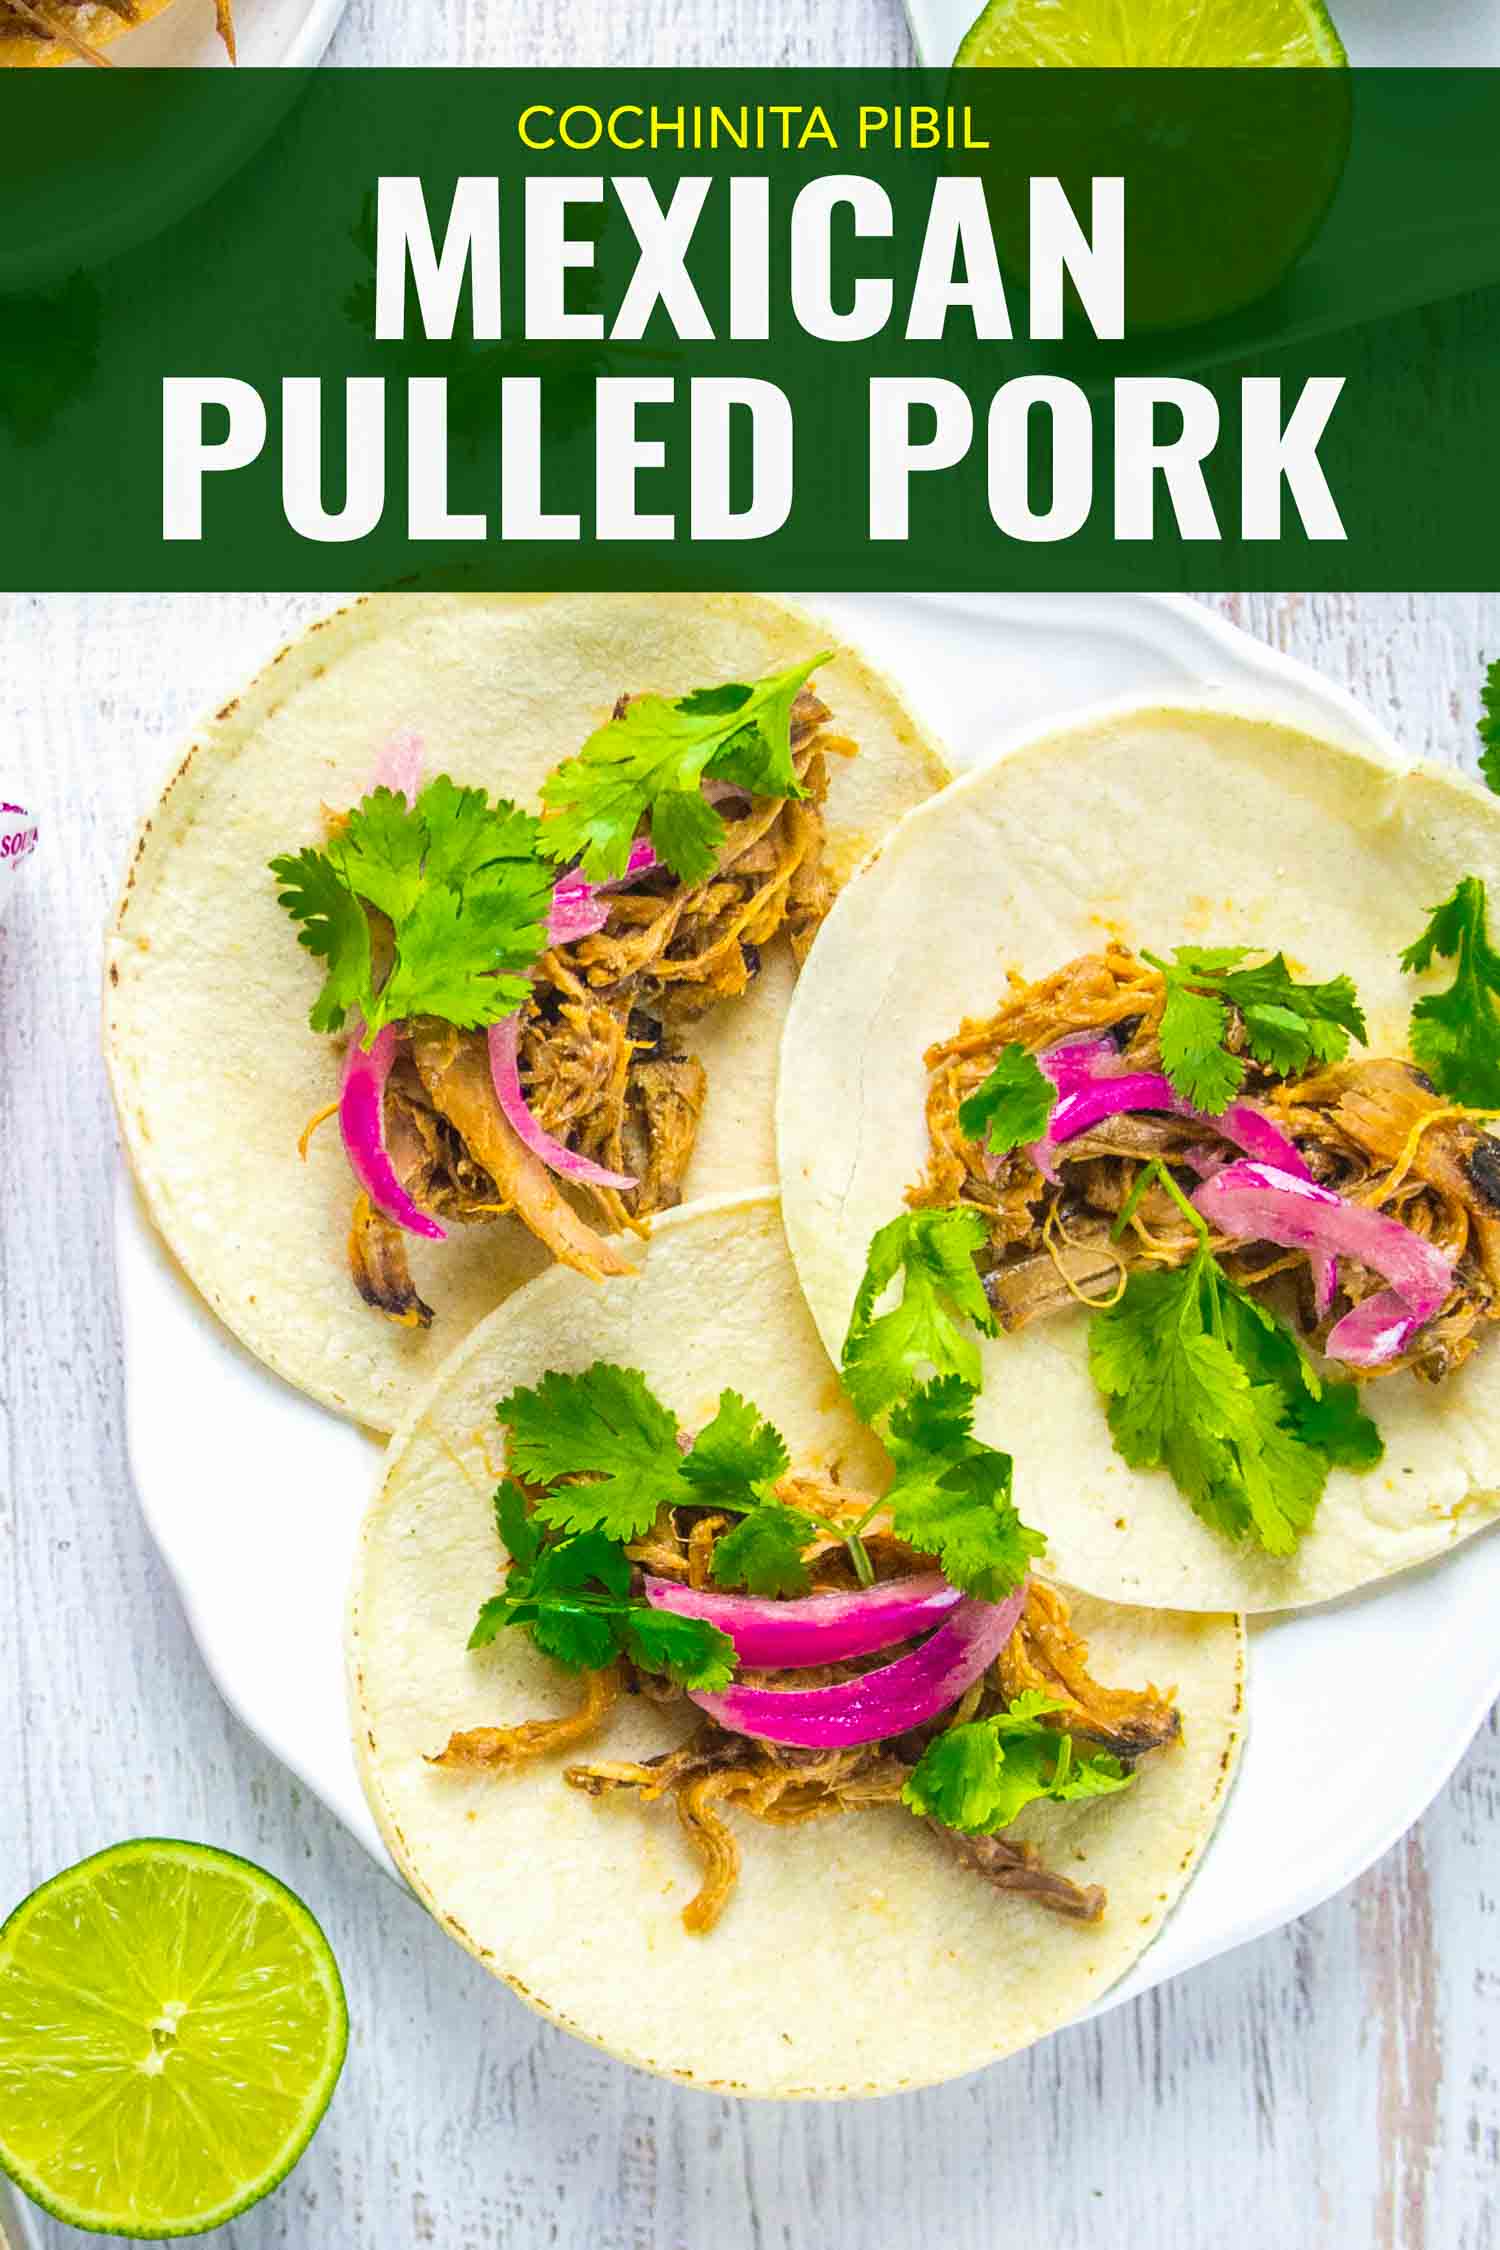 Mexican pulled pork served on tacos, also known as cochinita pibil in Mexico.